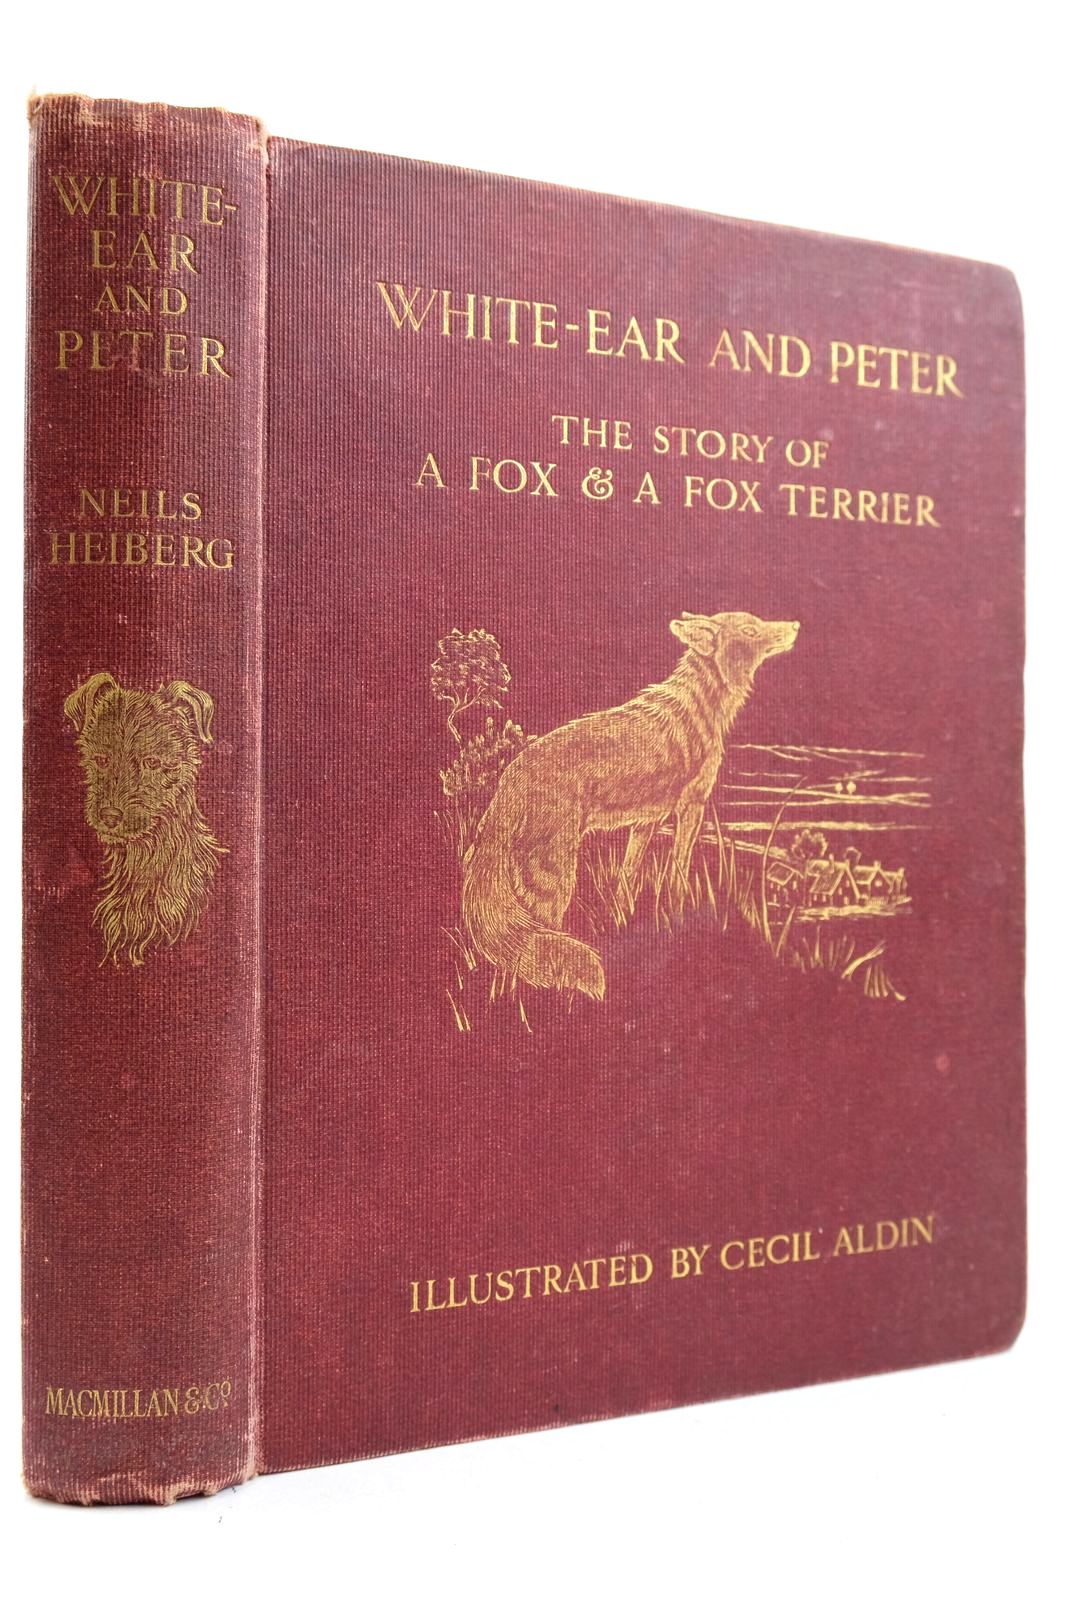 Photo of WHITE-EAR AND PETER written by Heiberg, Neils illustrated by Aldin, Cecil published by Macmillan &amp; Co. Ltd. (STOCK CODE: 2133287)  for sale by Stella & Rose's Books